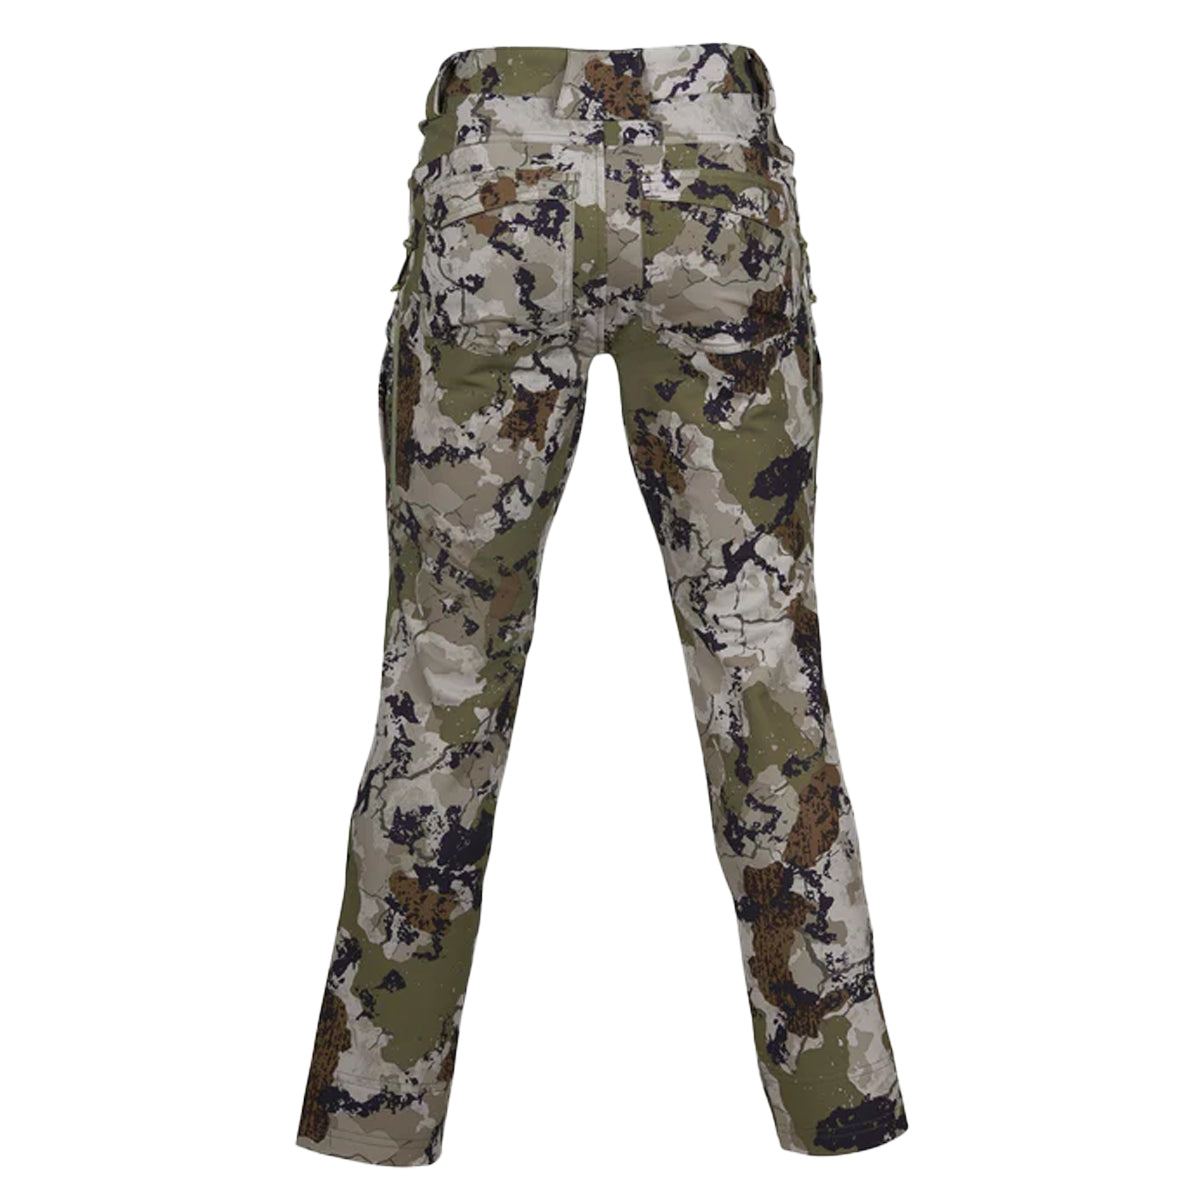 King's Draft Pant in XK7 by GOHUNT | King's - GOHUNT Shop